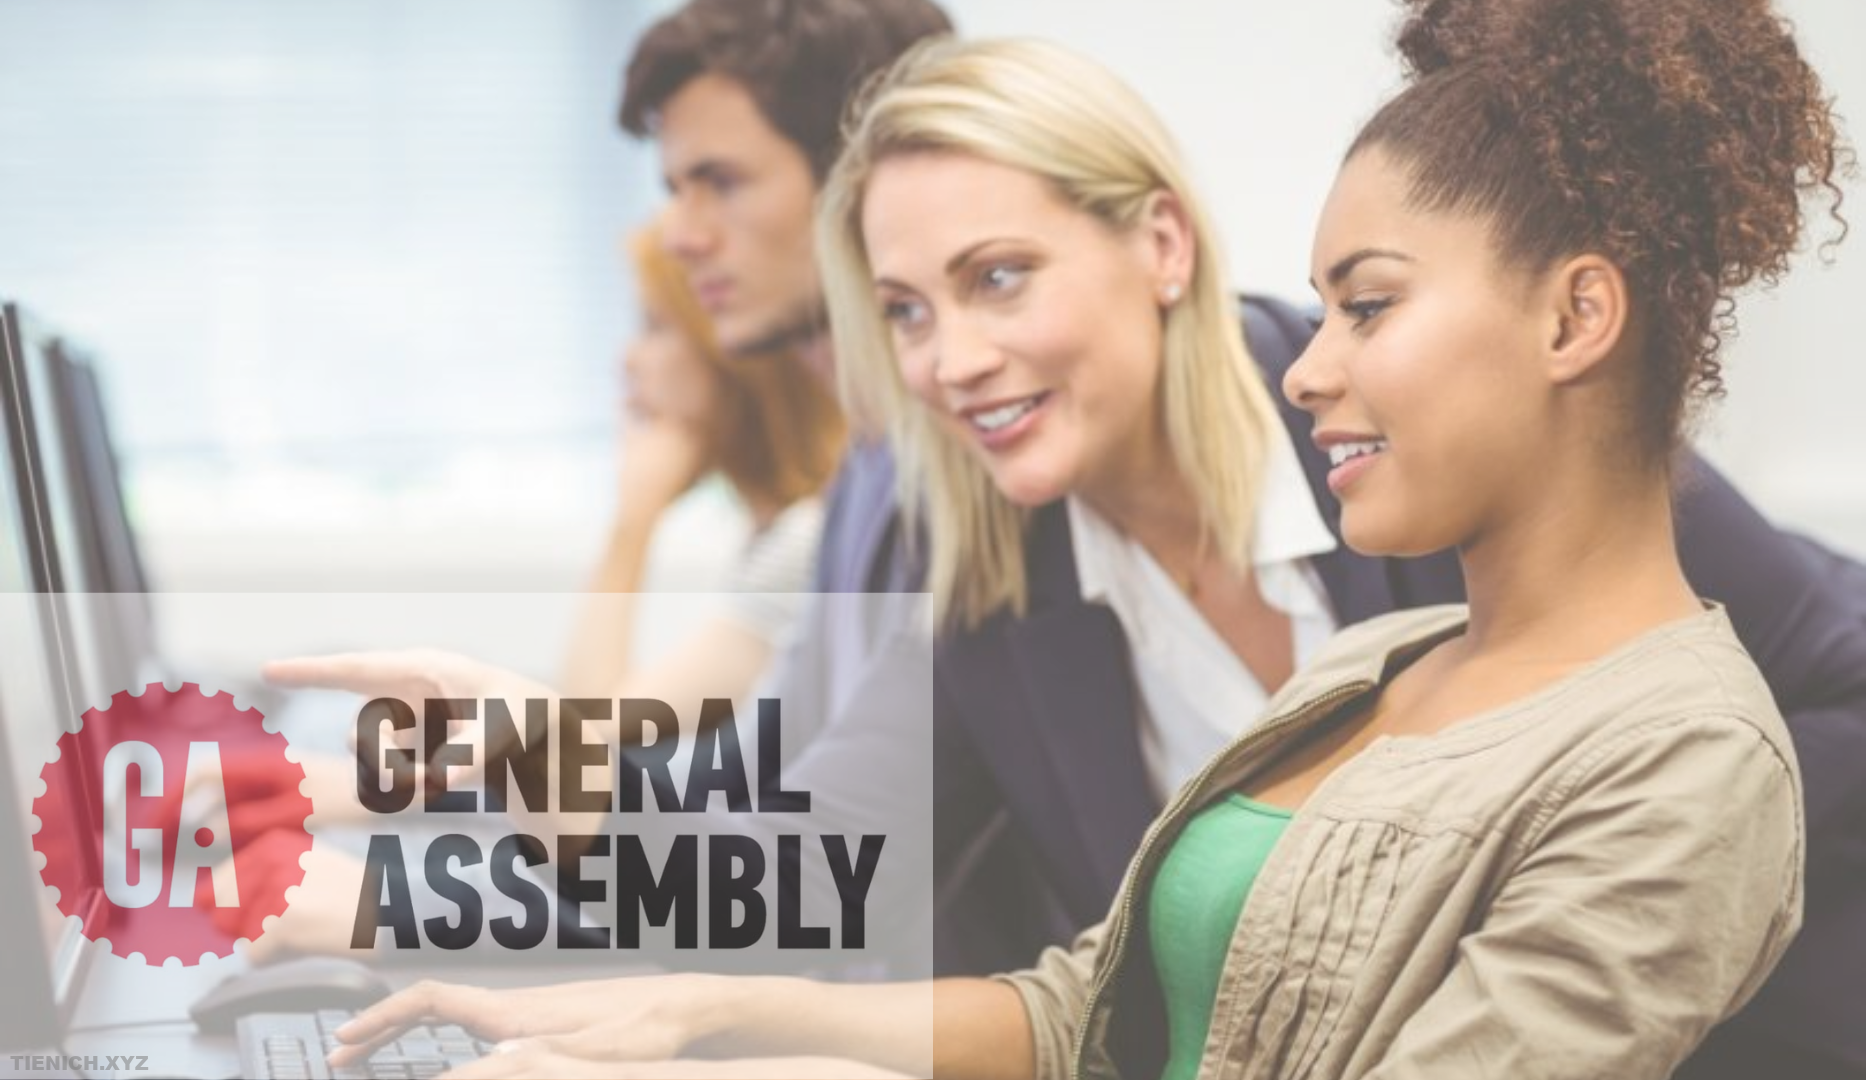 General Assembly Data Science Bootcamp